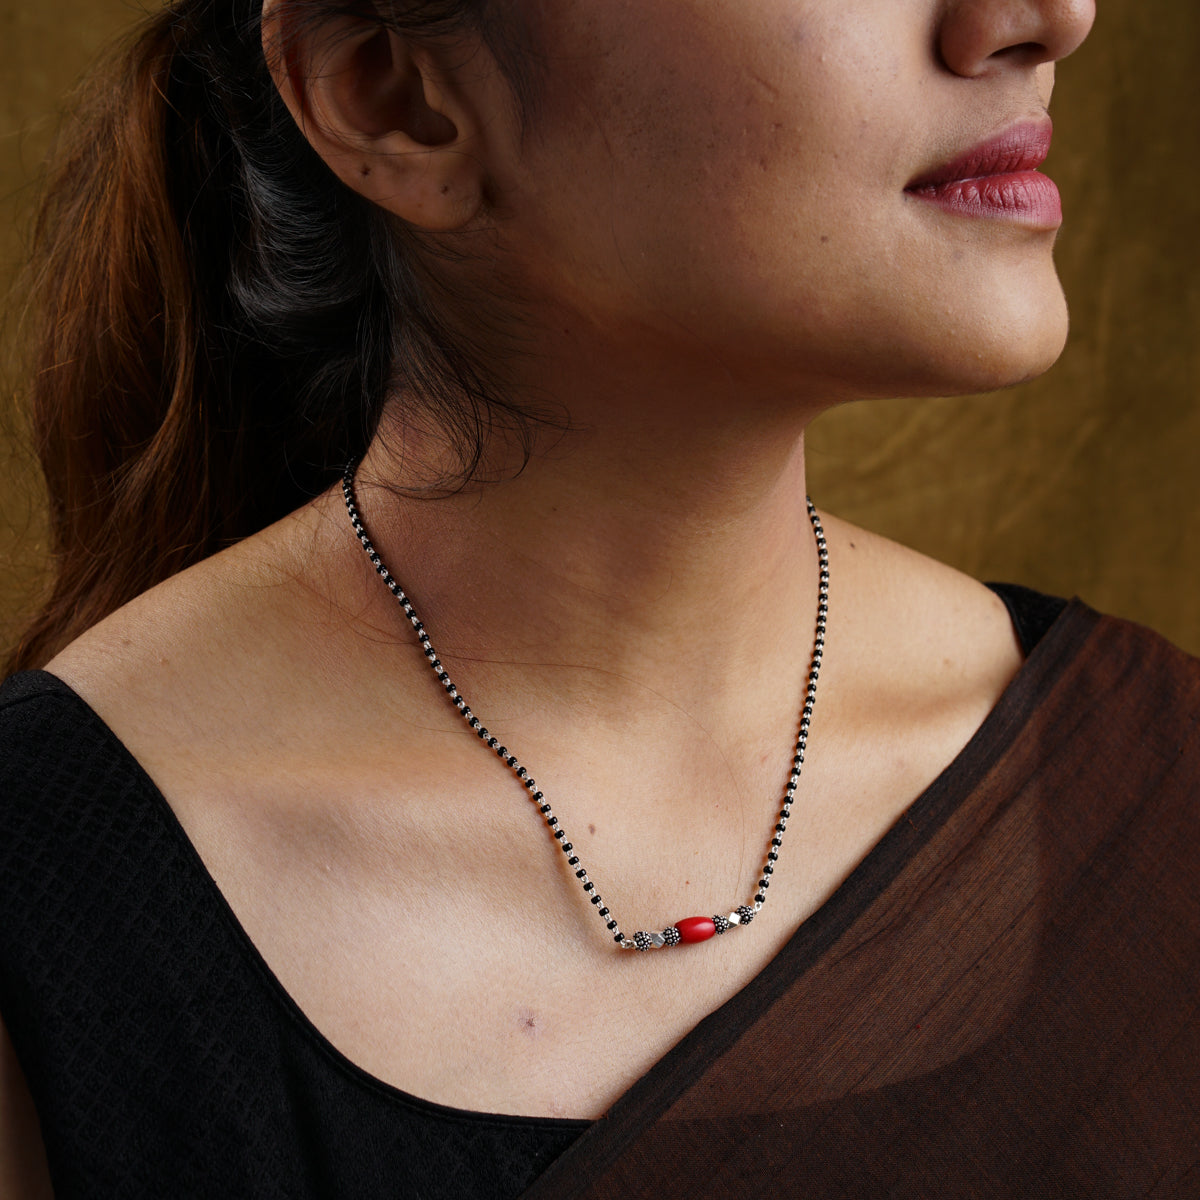 a woman wearing a necklace with a red bea